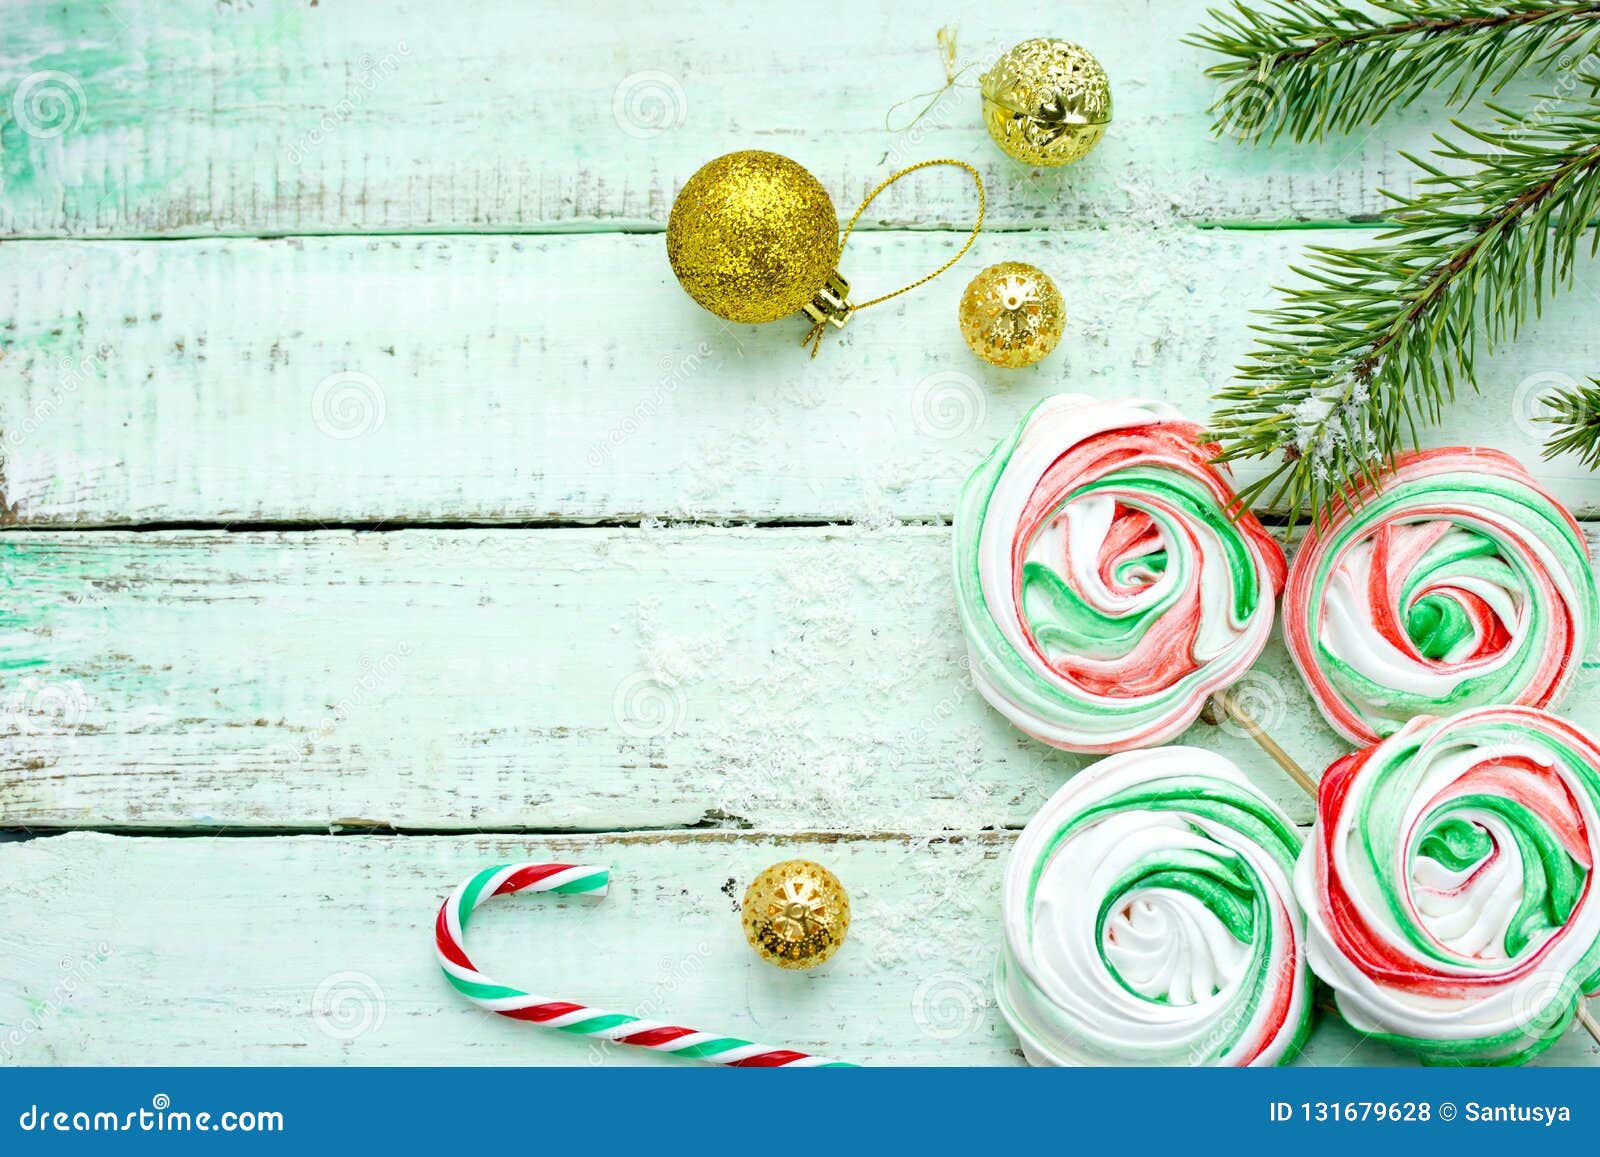 Christmas Background With Peppermint Meringue Stock Photo - Image of ...